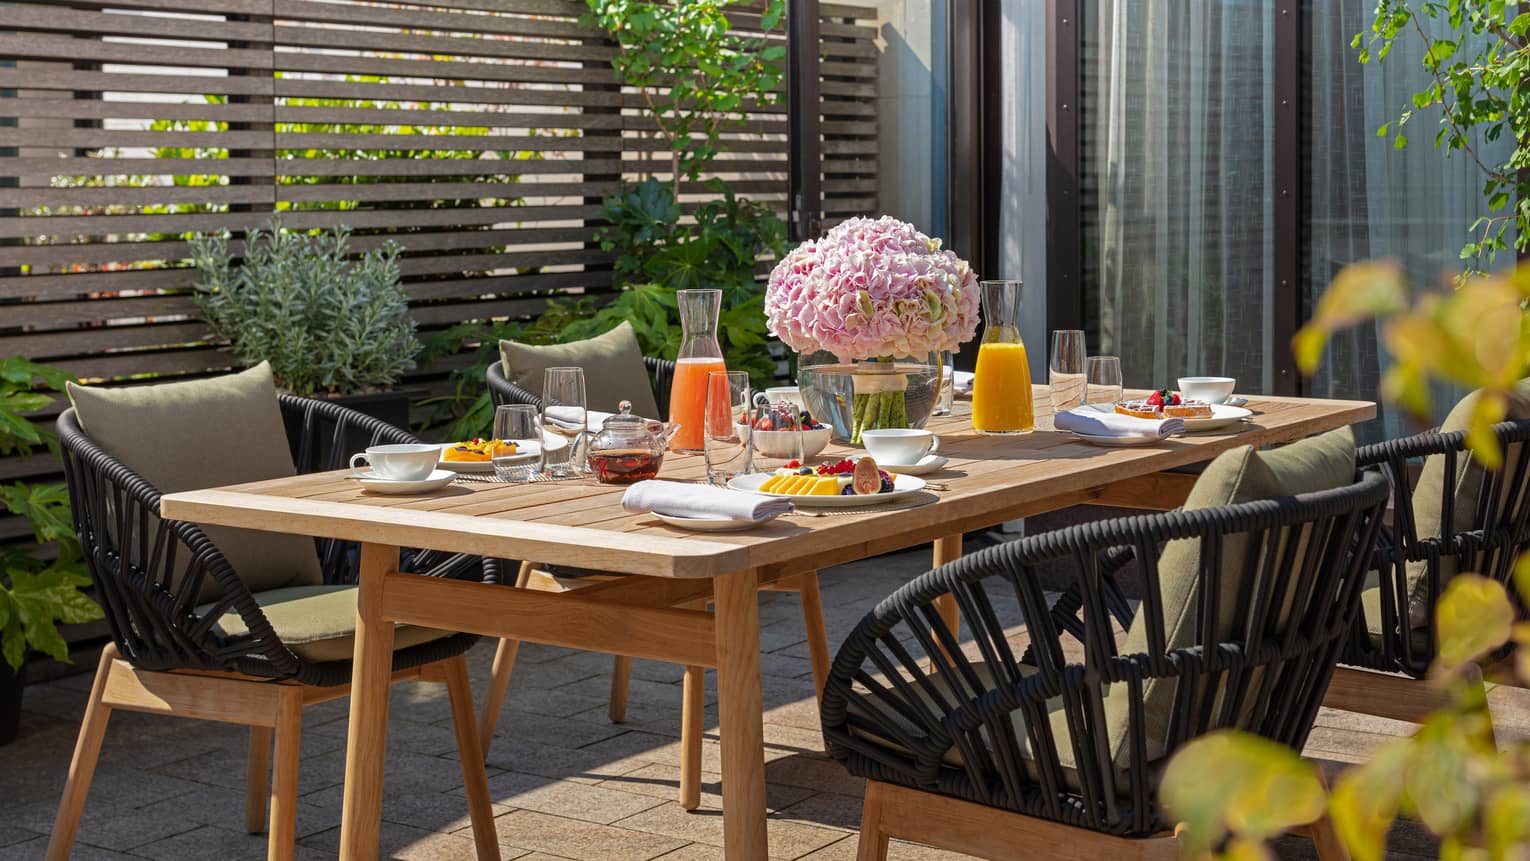 The Executive Conservatory at Four Seasons London Park Lane in Mayfair features an inviting outdoor dining area. A rustic wooden table is set with a colorful breakfast spread, including fresh fruits, pastries, juices, and tea. The table is beautifully decorated with a large bouquet of pink hydrangeas, enhancing the fresh, vibrant setting. Stylish black wicker chairs with comfortable cushions surround the table, nestled amidst lush greenery and a modern wooden slatted privacy screen. The scene is sunlit, offering a pleasant and serene dining experience.